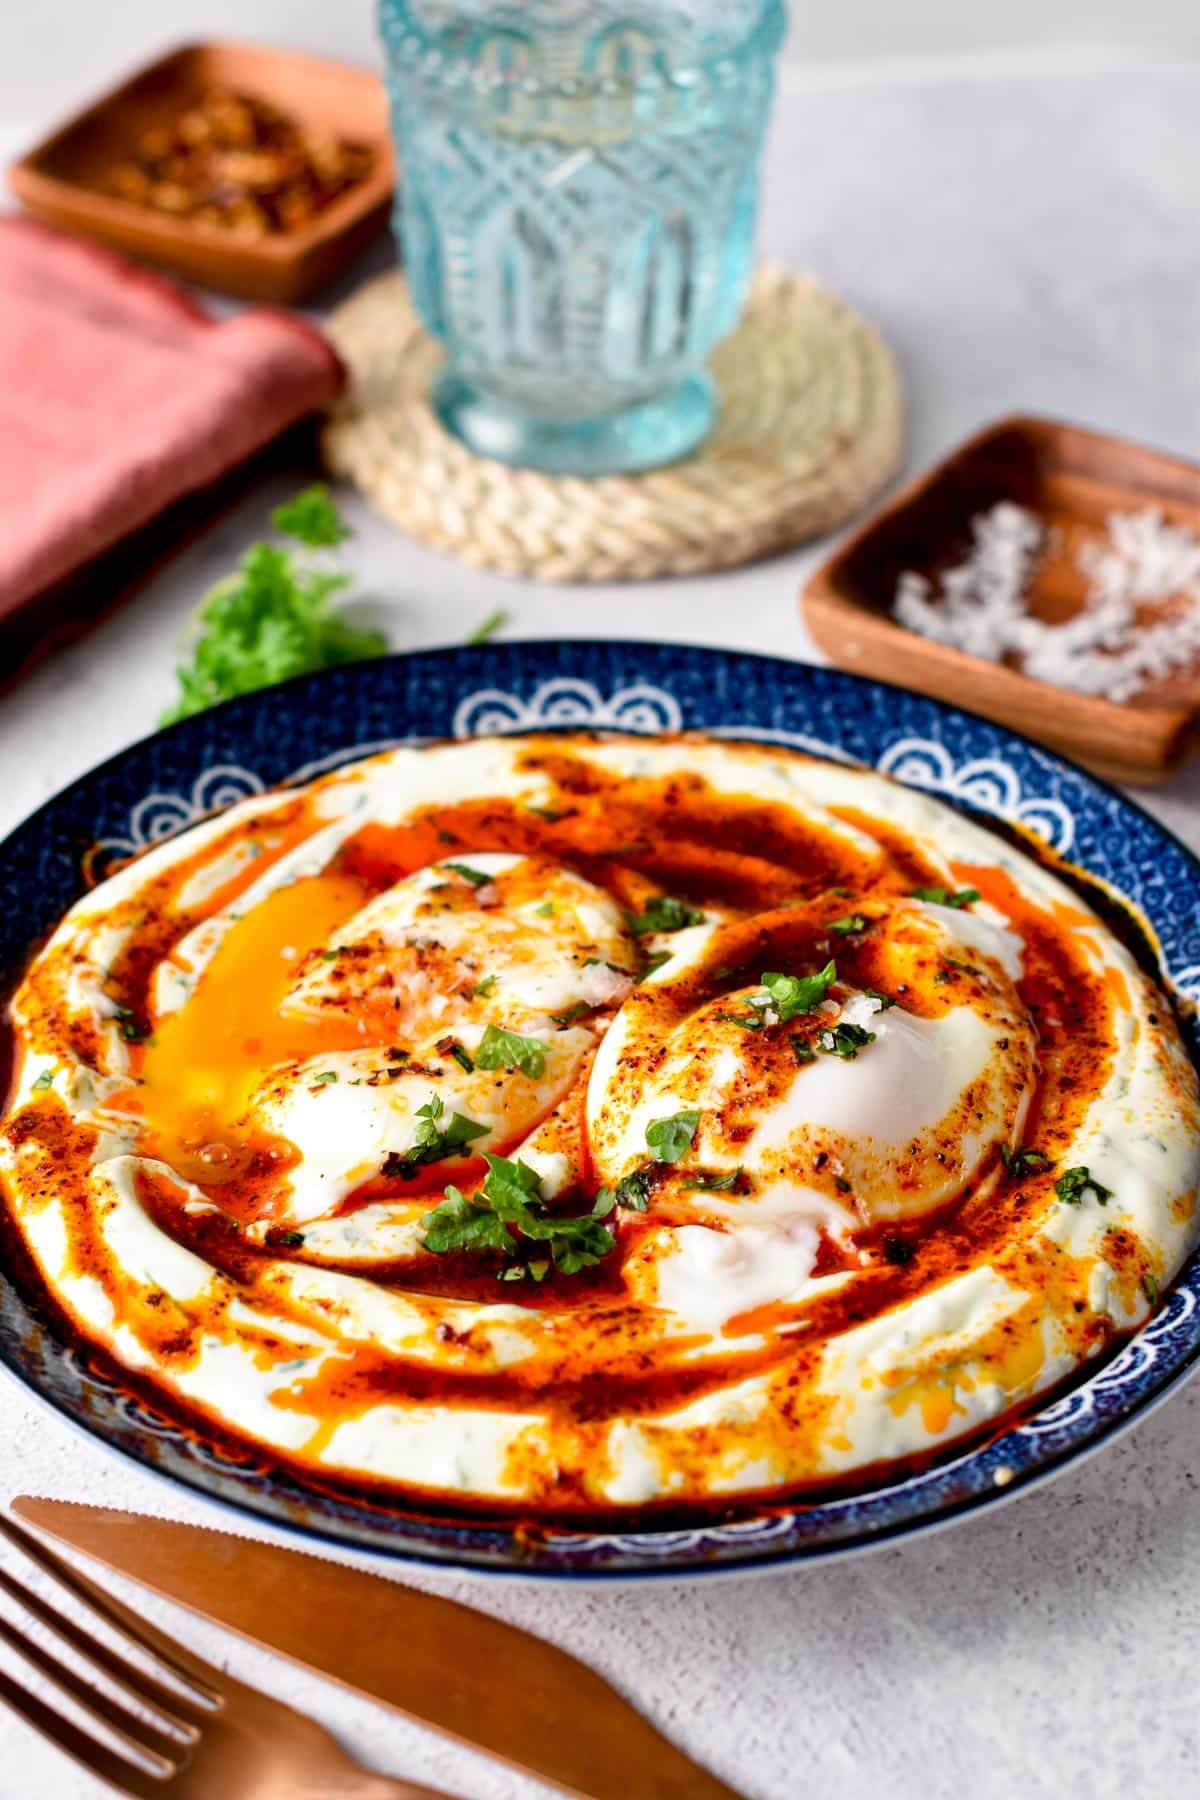 These Turkish Eggs also called Cilbir are the best high-protein low-carb breakfast ever packed with 25 g proteins. An ultra creamy garlic yogurt, topped with warm poached eggs and spicy Aleppo butter.